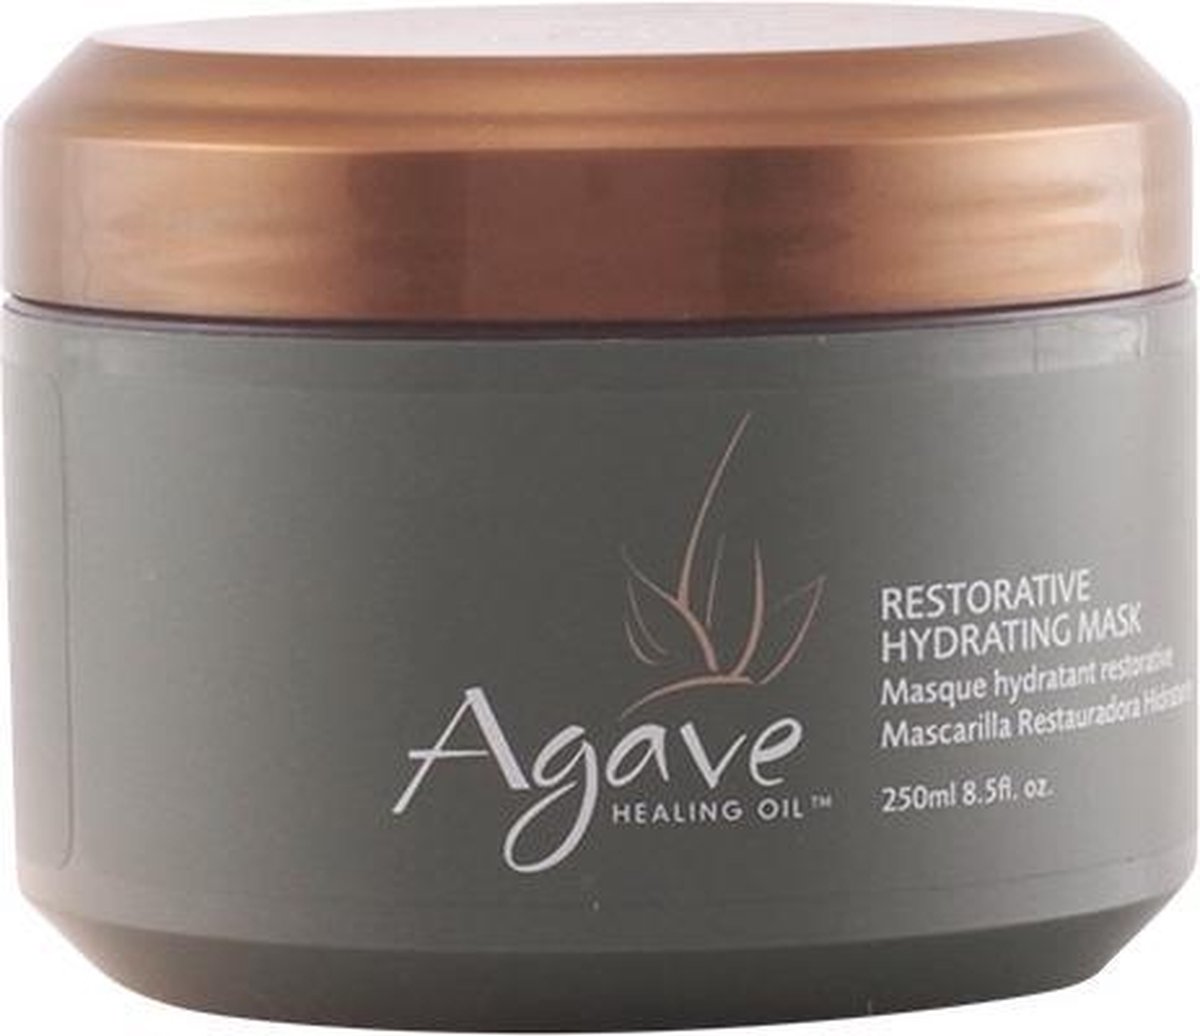 Hydraterend Masker Healing Oil Agave (250 ml)